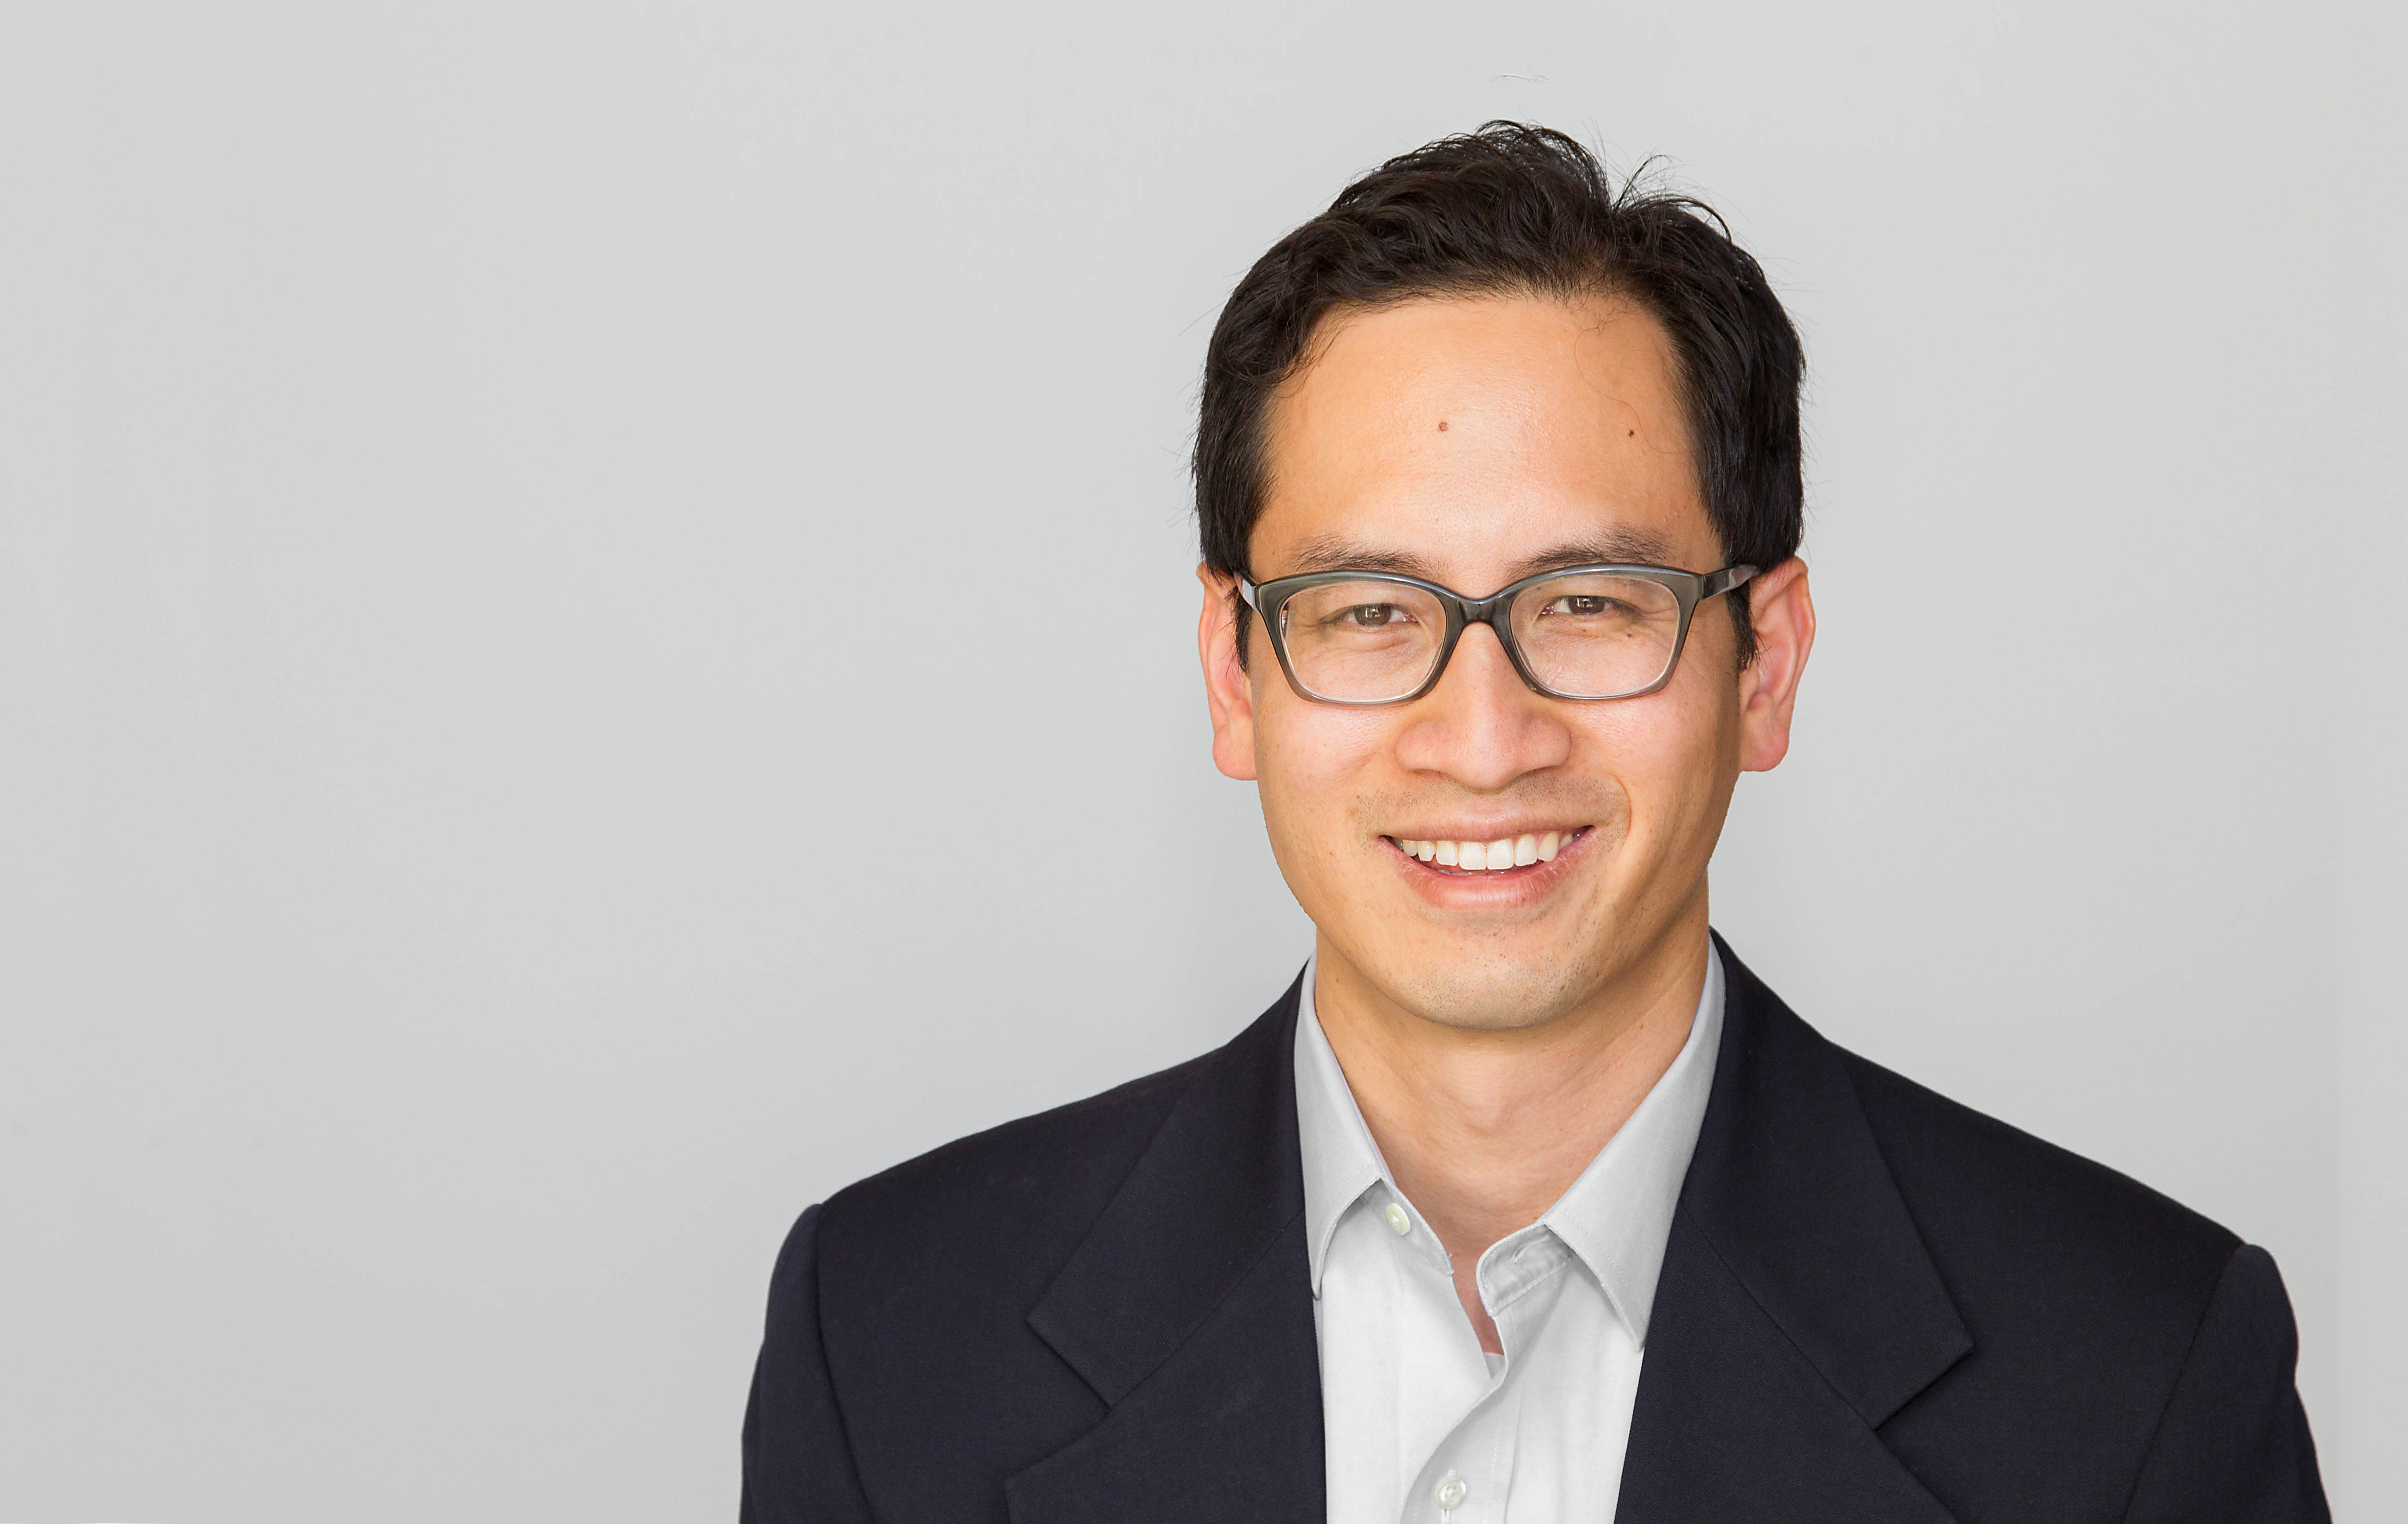 A headshot of Professor Edward Chang, smiling, wearing glasses, and standing against a grey background.